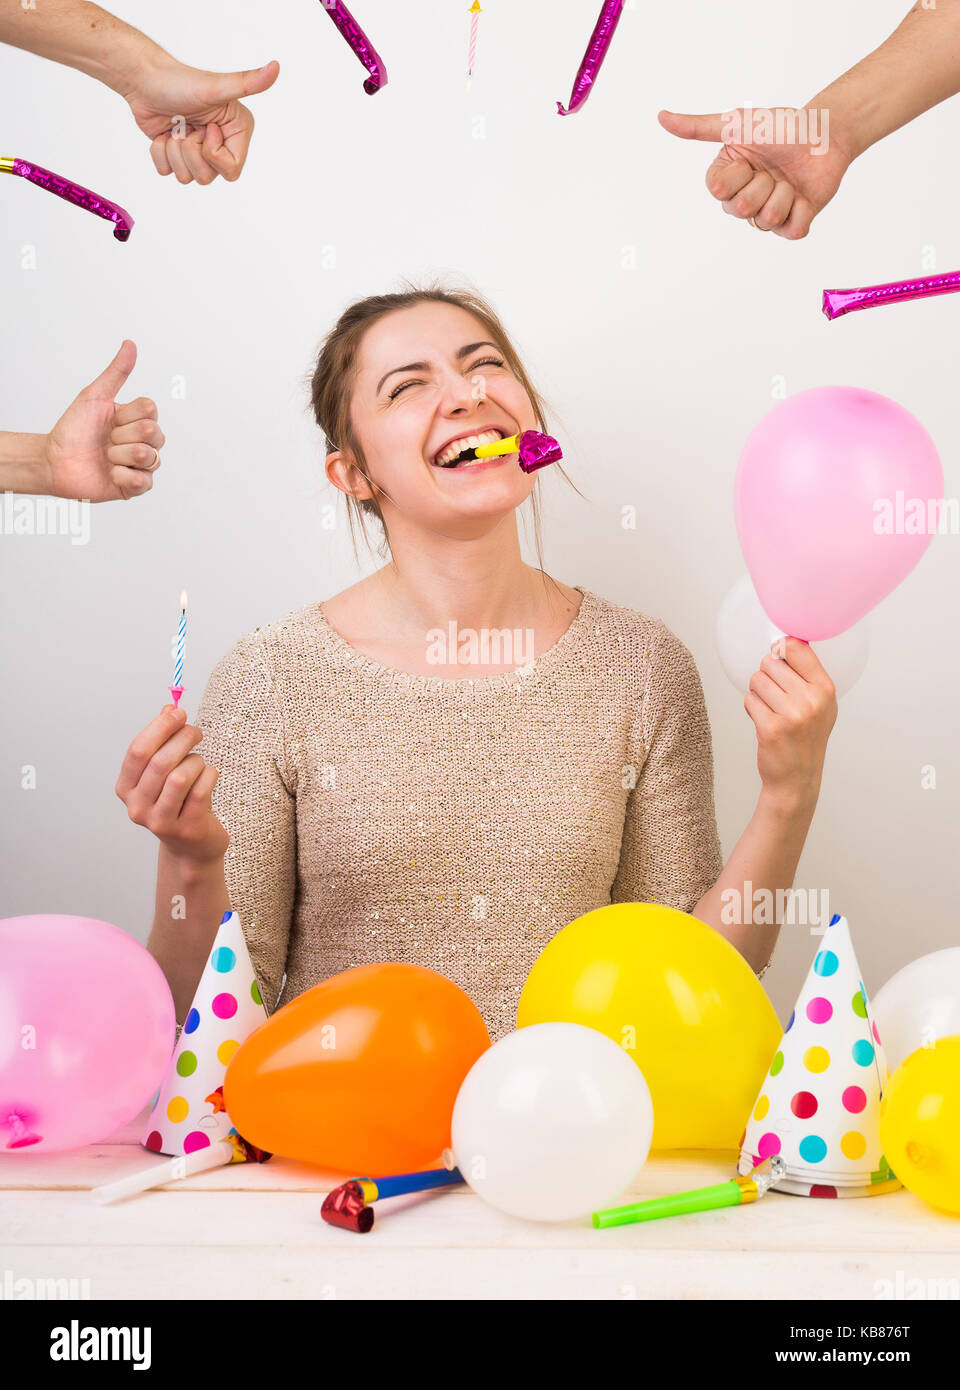 party, celebration, birthday concept. extremelly happy young girl is shrieking with laughter, holding small pink balloon in one arm, blue candle in ot Stock Photo